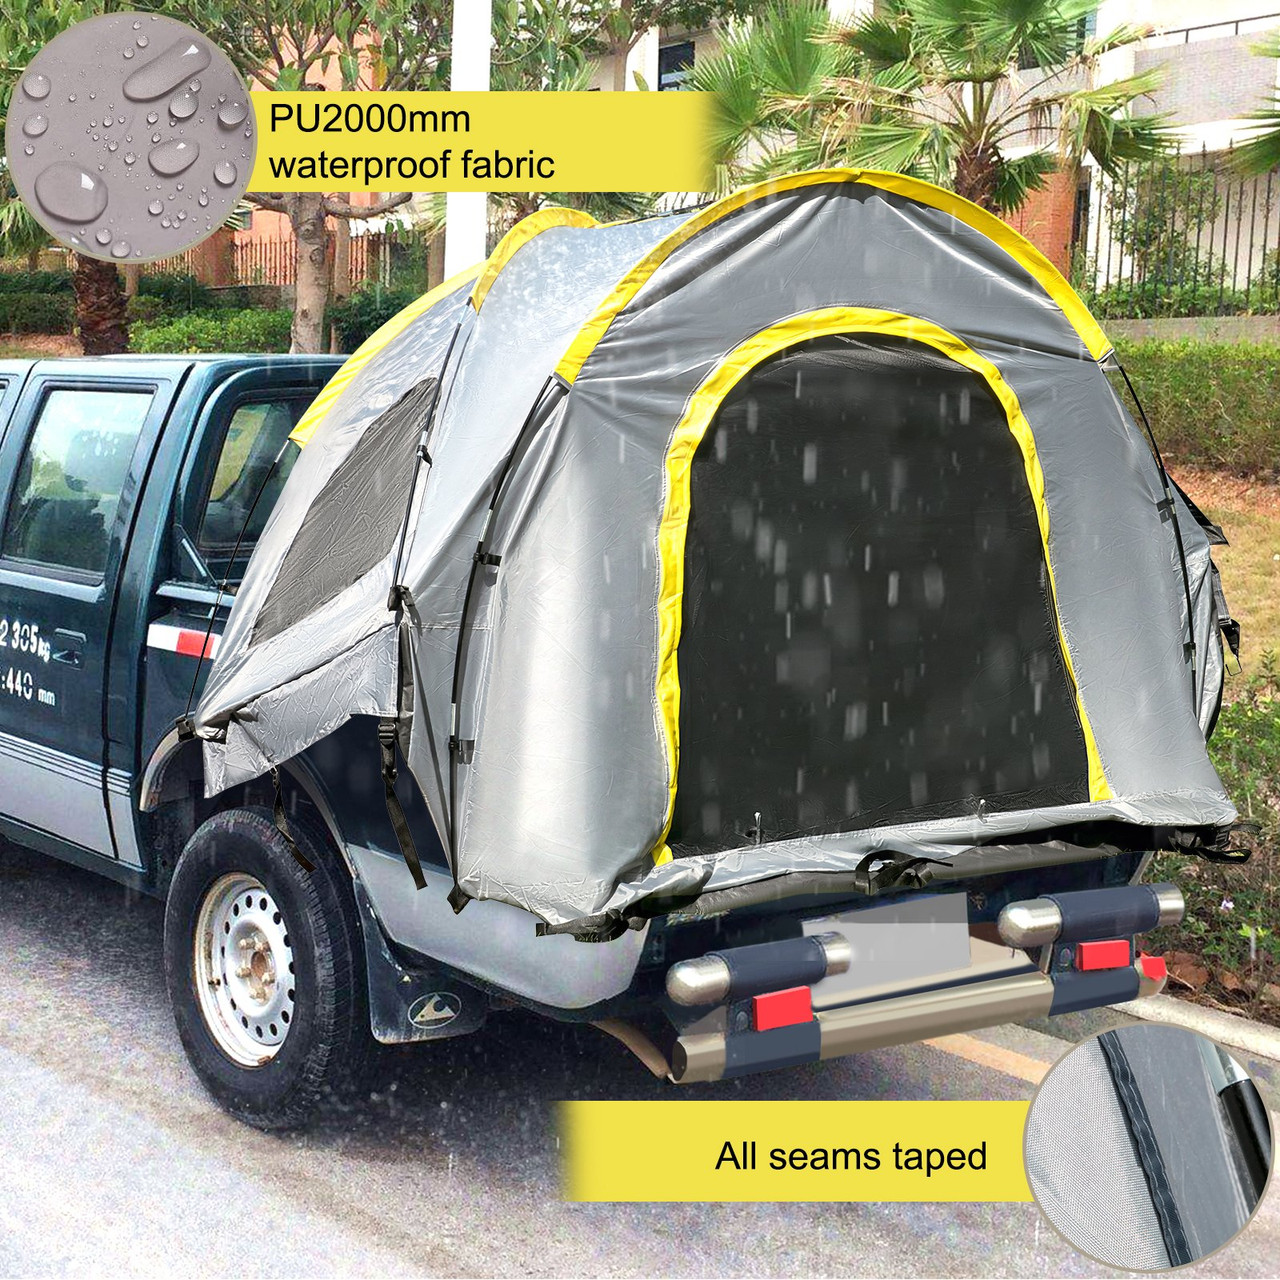 Truck Tent 6.5 ft, Truck Bed Tent, Pickup Tent for Full Size Truck, Waterproof Truck Camper, 2-Person Sleeping Capacity, 2 Mesh Windows, Easy to Setup Truck Tents for Camping, Hiking, Fishing